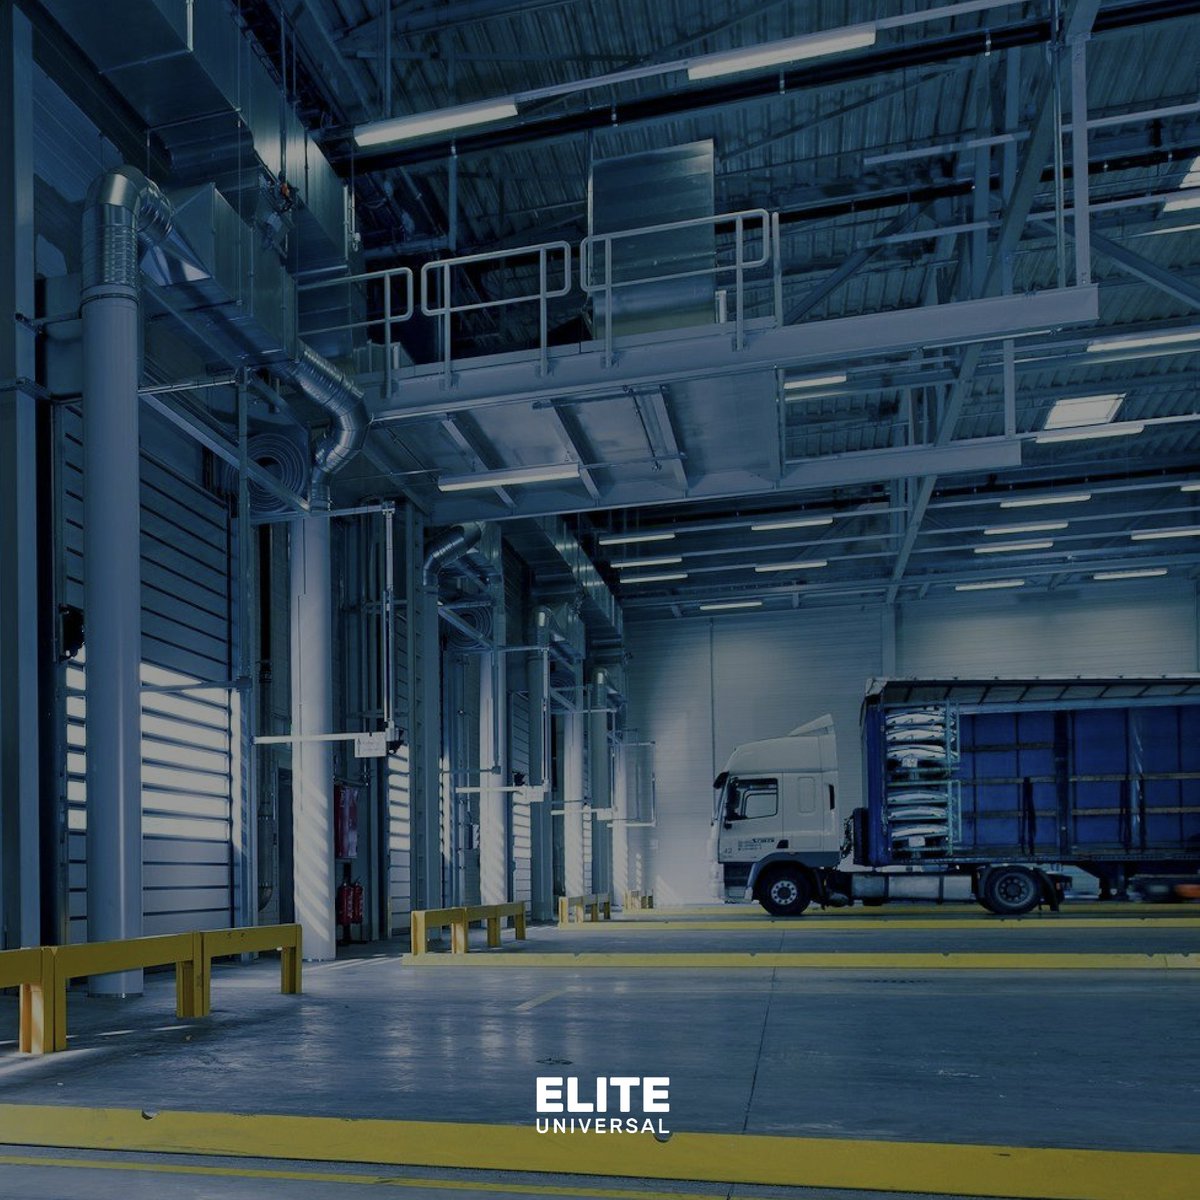 Elite Universal can offer a full range of warehousing solutions across the UK, with facilities utilised in Felixstowe, London, Southampton and the Midlands.

Speak to our team to find out more: +44 (0) 1394 799055

#EliteUniversal #Warehousing #Cargo #FreightForwarding